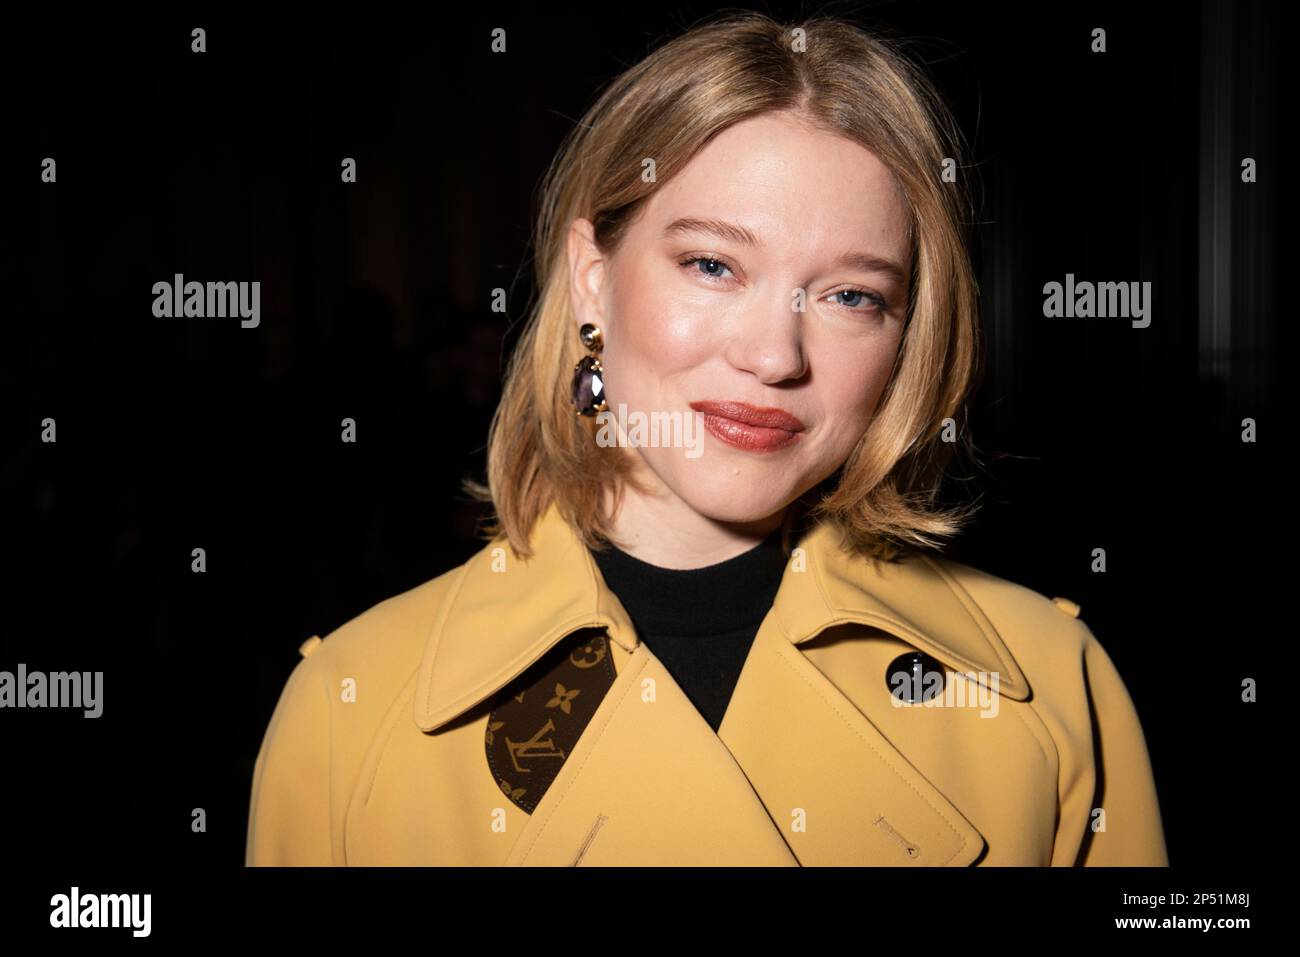 Lea Seydoux Is Louis Vuitton's New Ambassador – The Hollywood Reporter